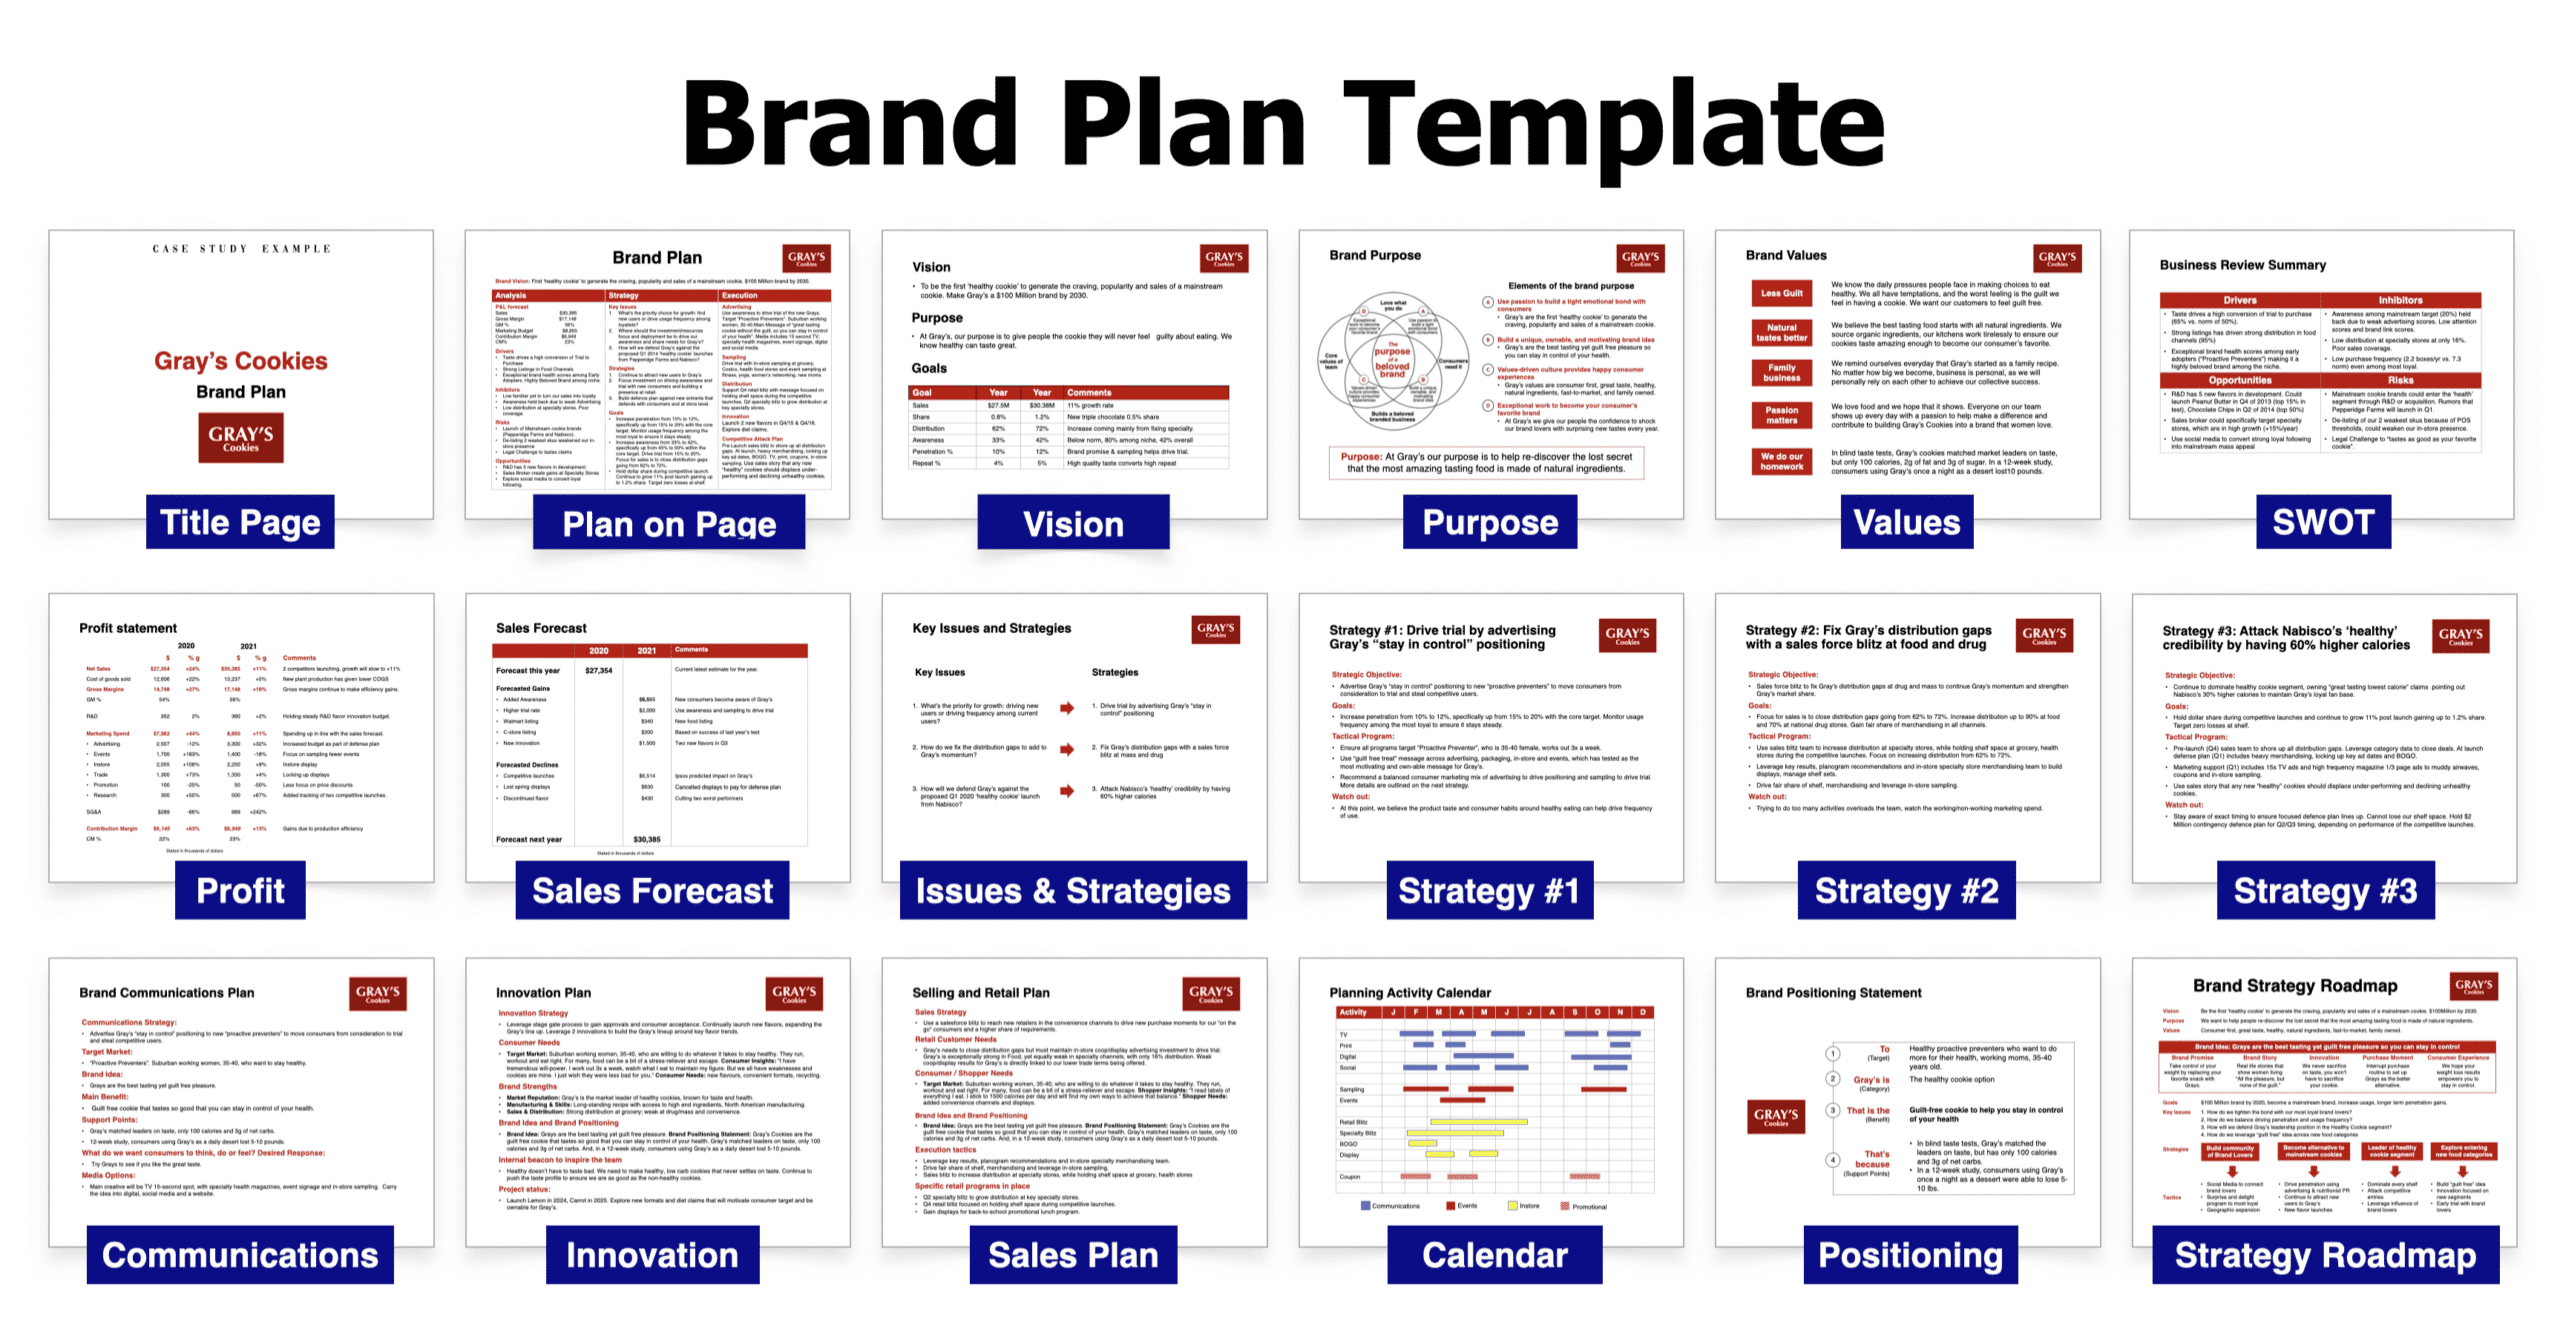 Brand Plan Template slides for our Brand Toolkit